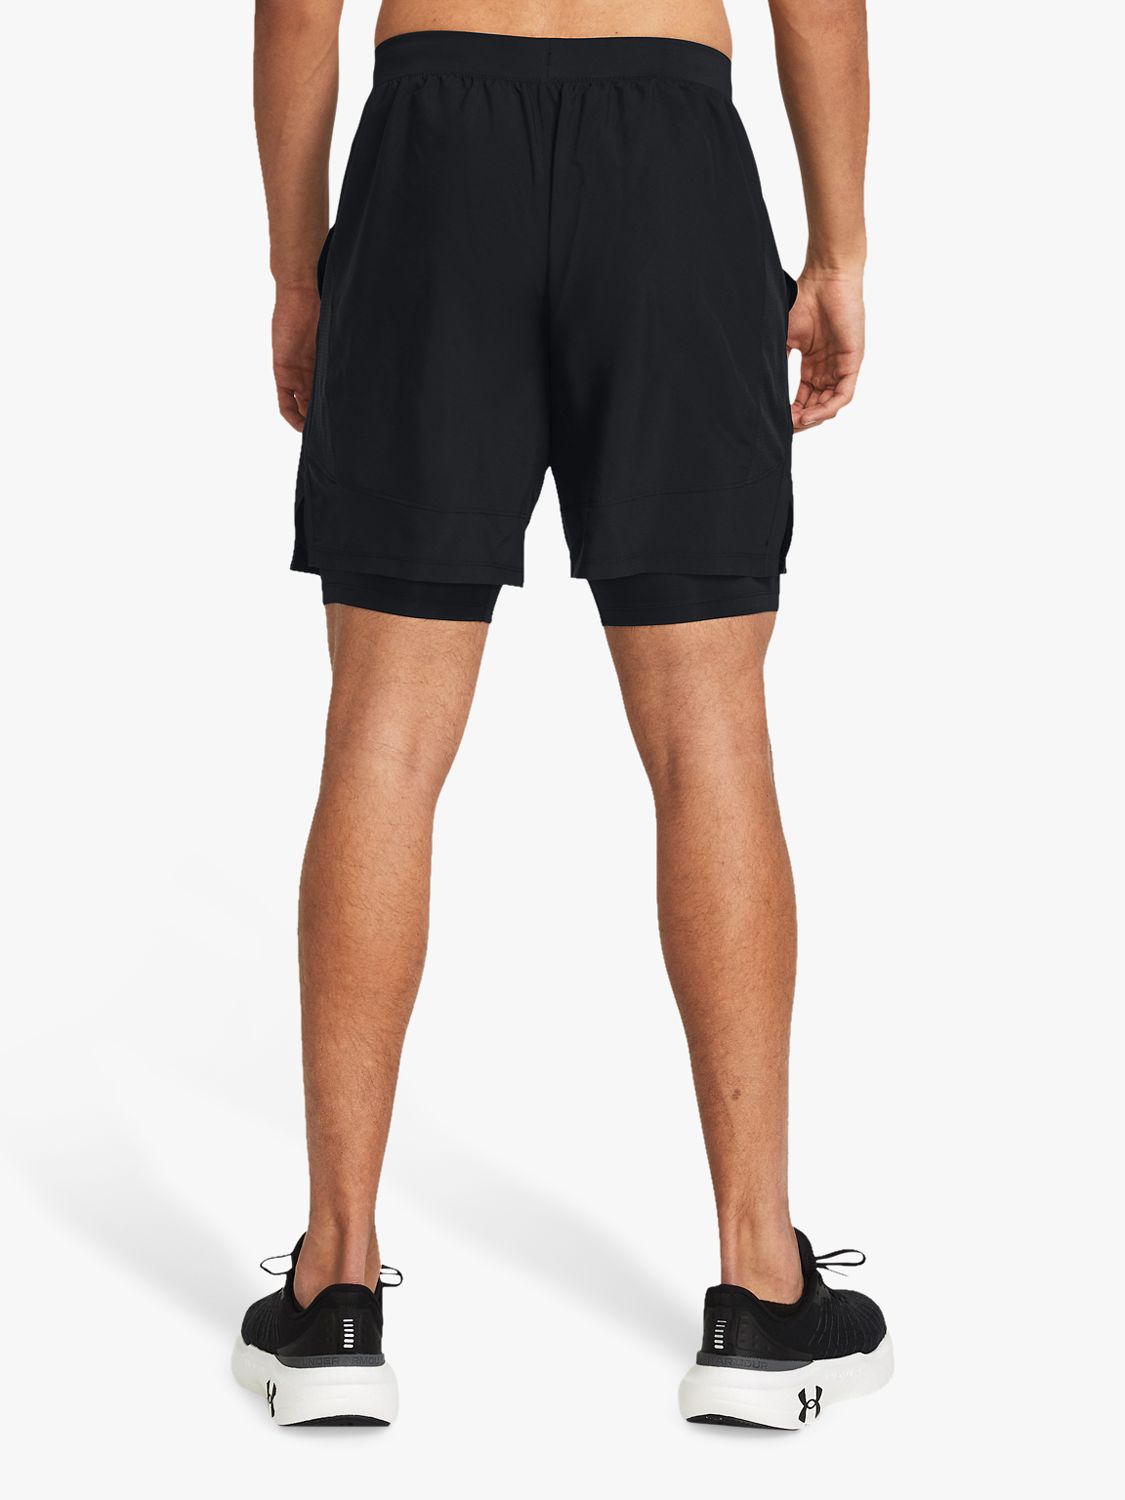 Under Armour Launch 2-in-1 Running Shorts, Black/Reflective, XL